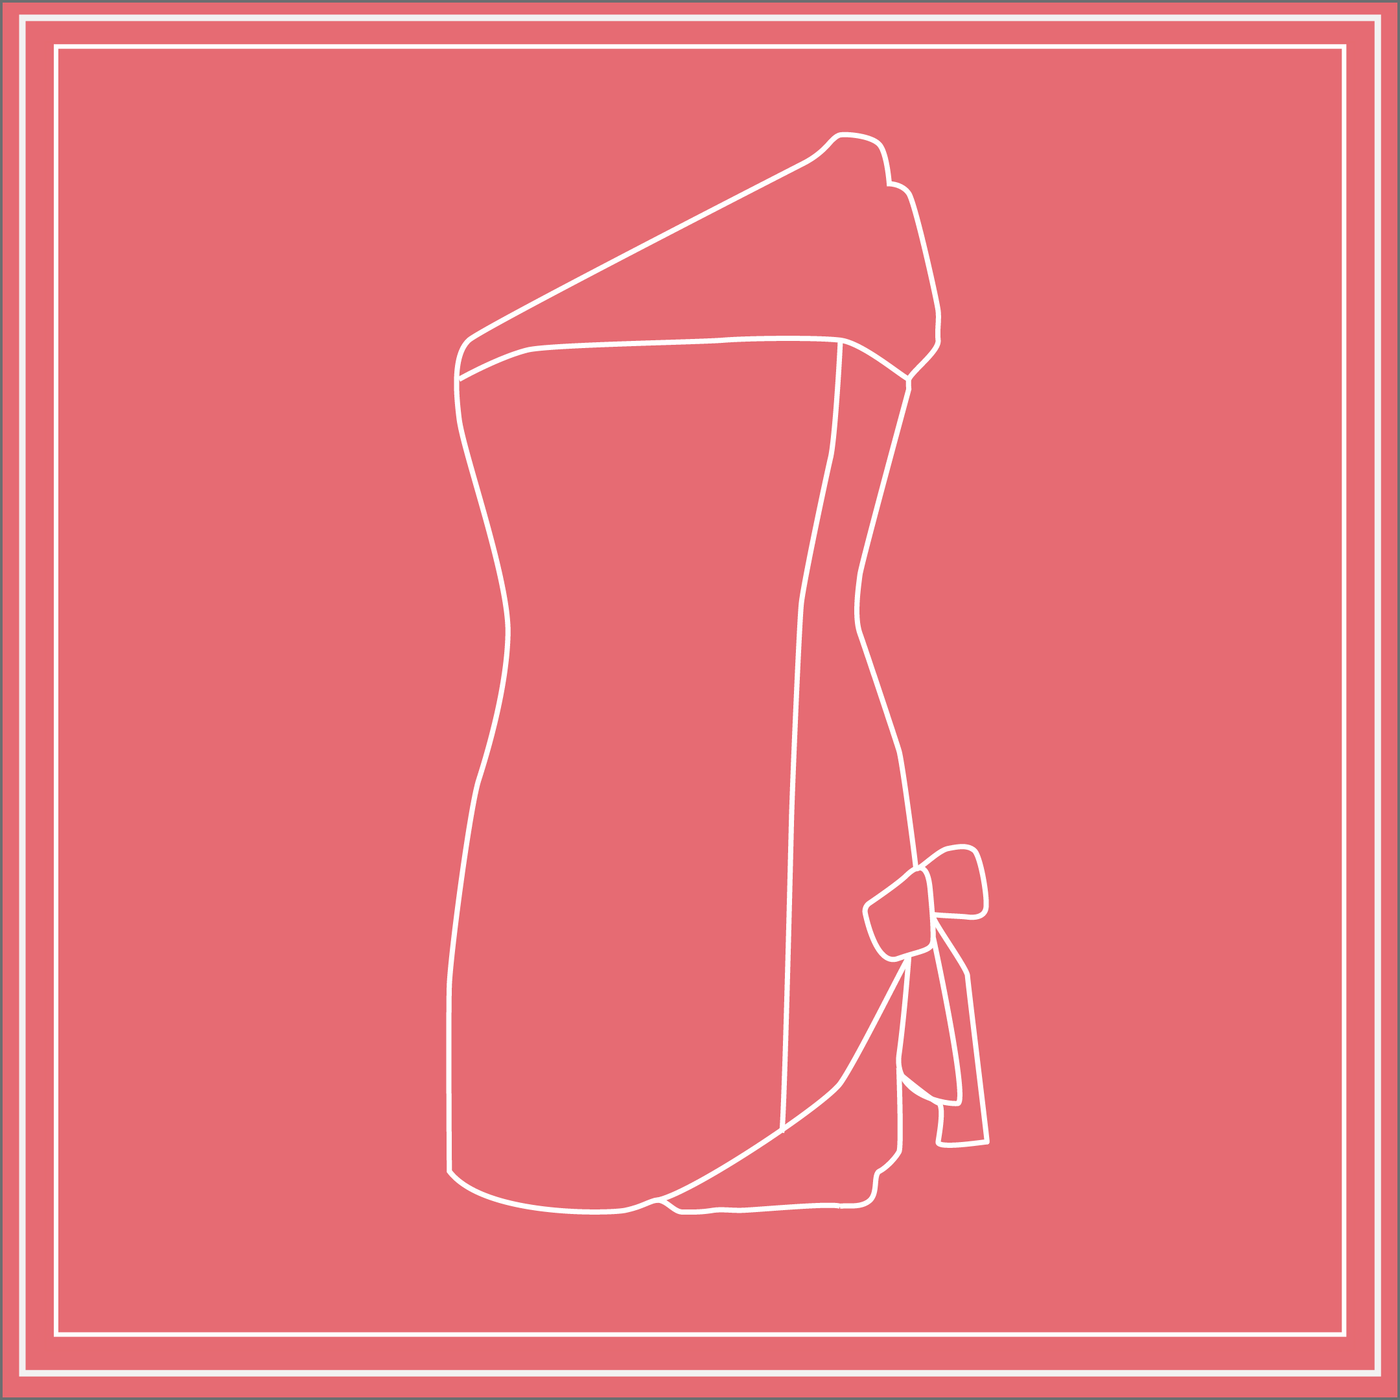 The Cocktail Dress Course